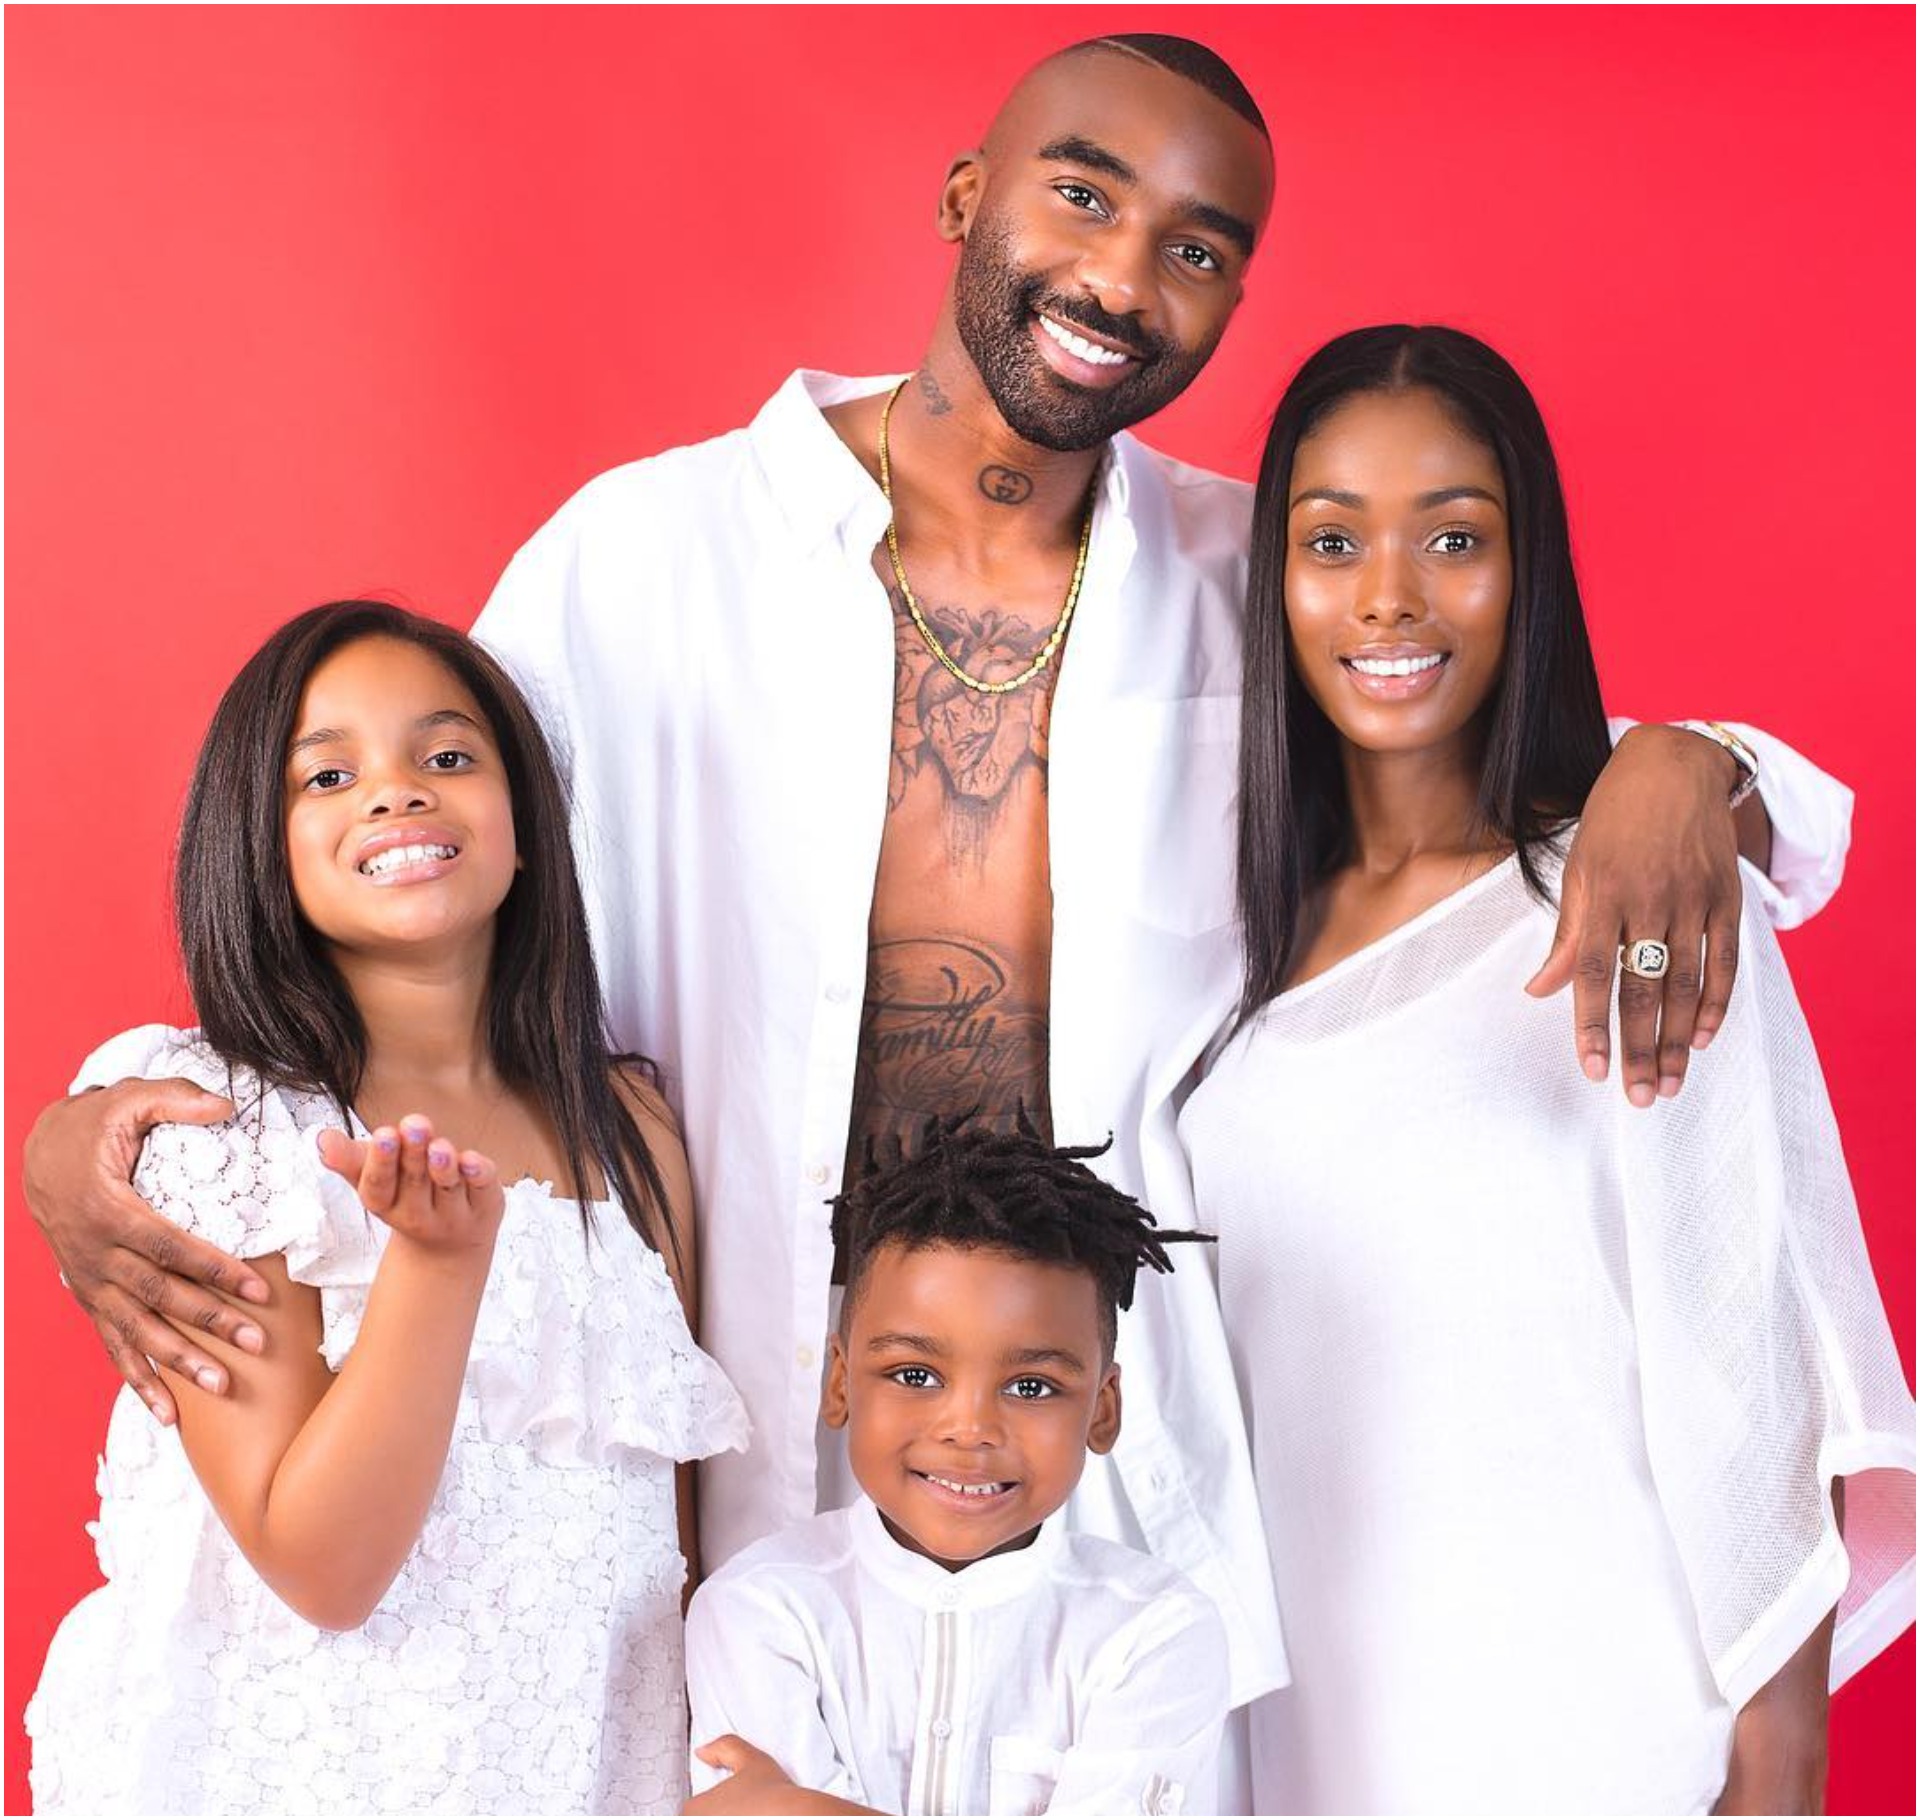  Who Is Bianca Naidoo, Riky Rick's Wife? - 7 Things You Did Not Know About Her